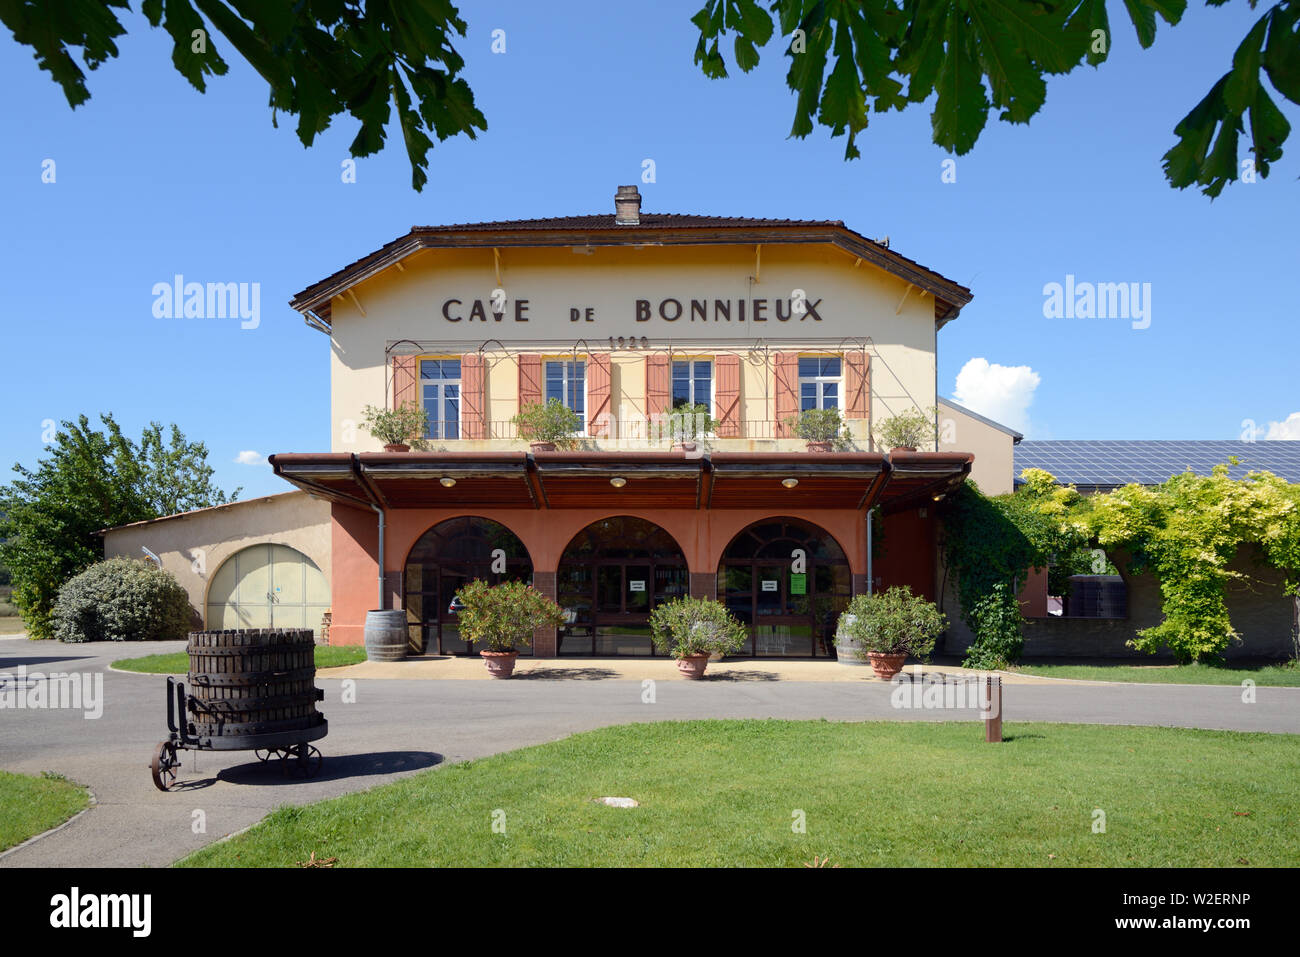 Cave de Bonnieux or Bonnieux Winery, built in 1920, in the Luberon Regional Park Provence France Stock Photo